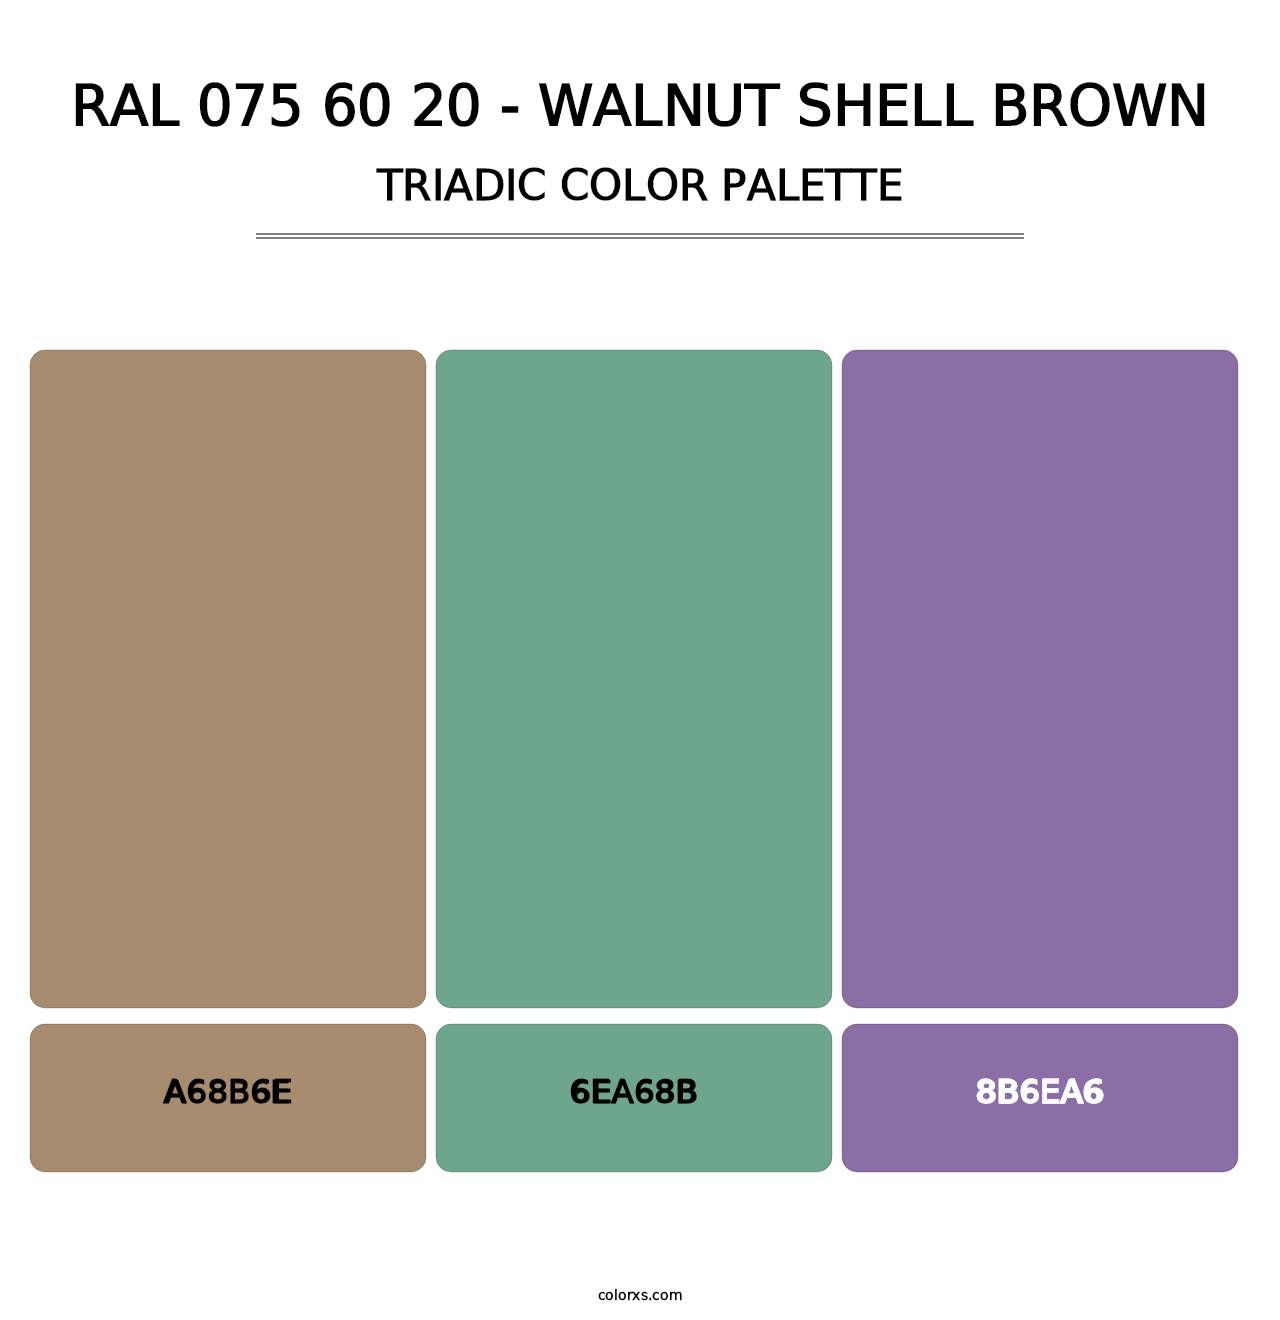 RAL 075 60 20 - Walnut Shell Brown - Triadic Color Palette